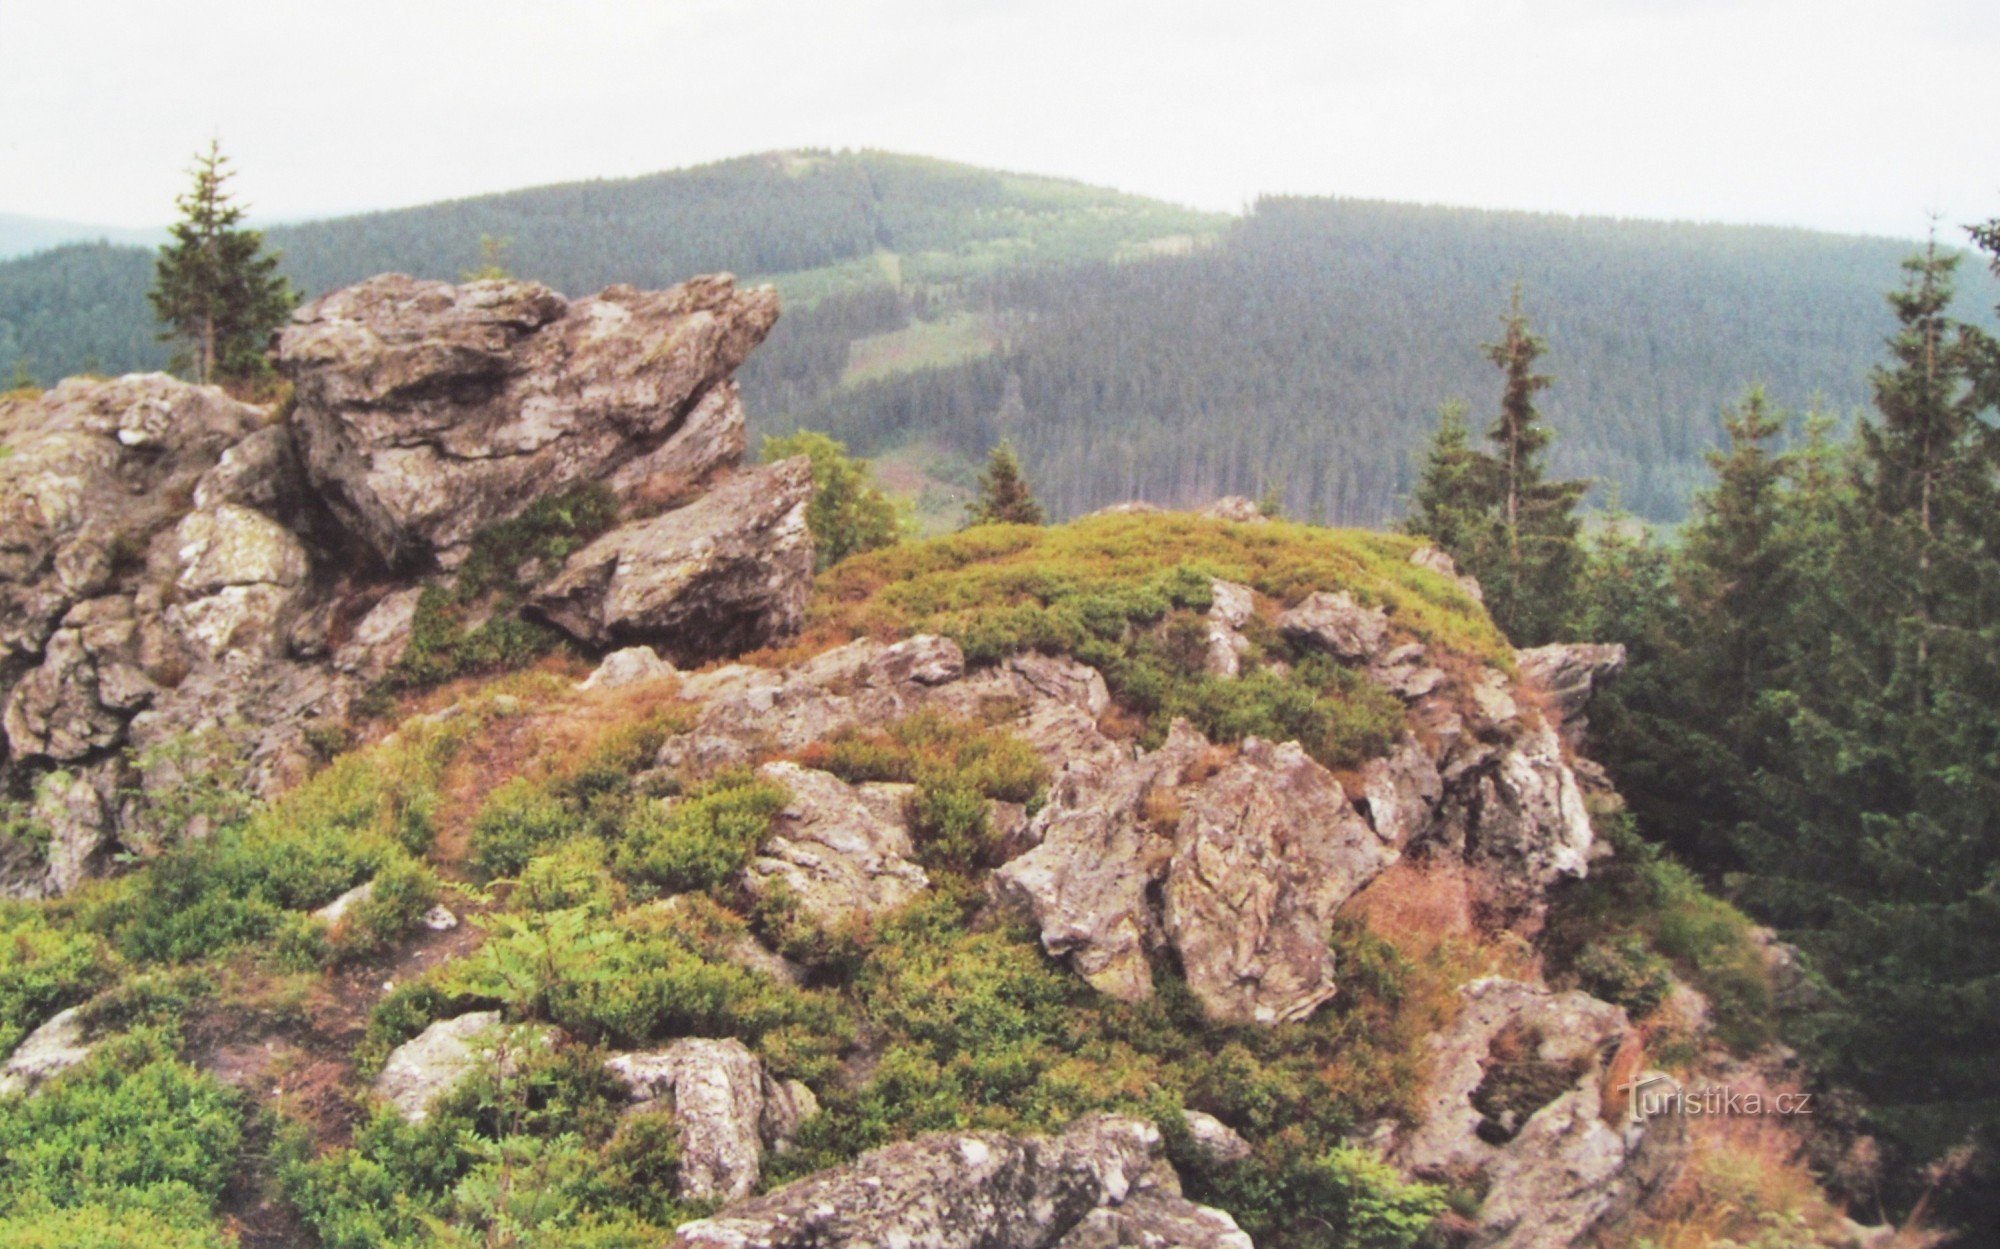 Rocks at the top and a view of Žárový vrch